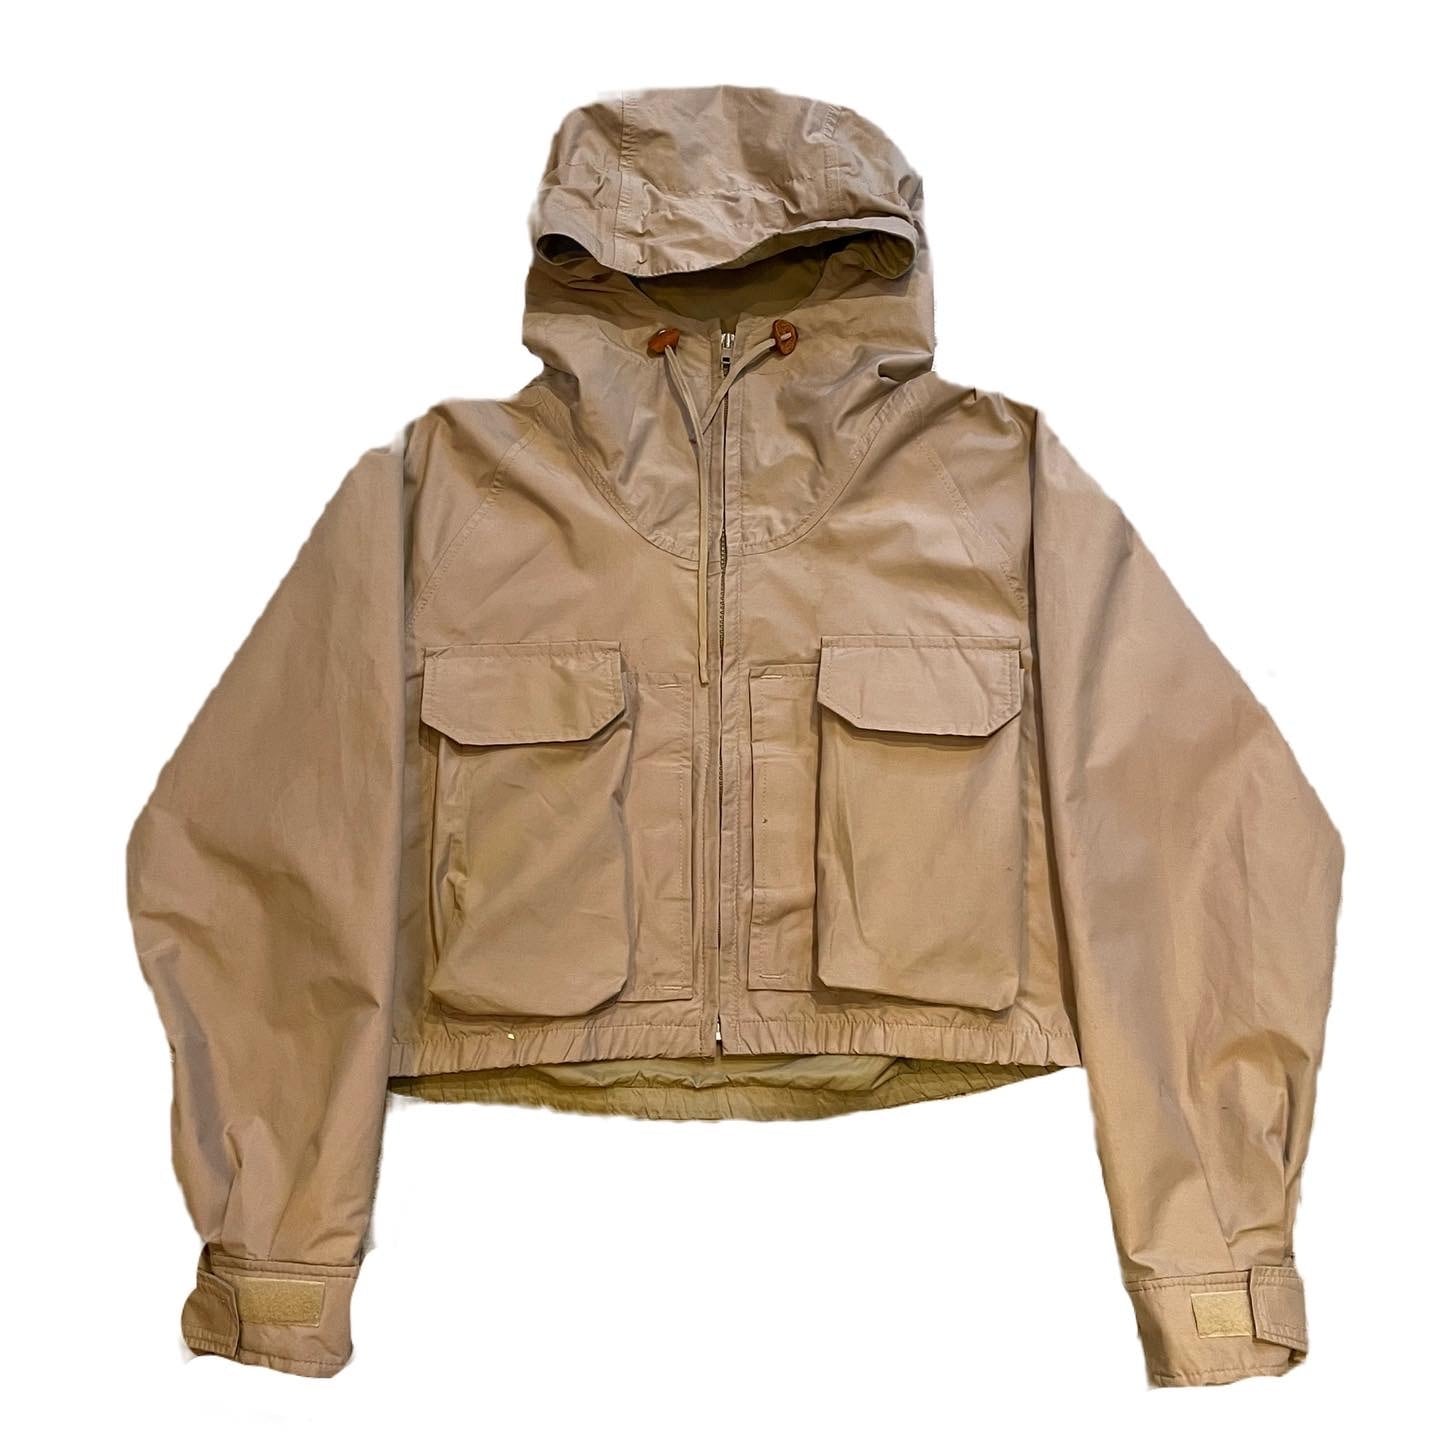 80s Columbia fishing jacket | What’z up powered by BASE